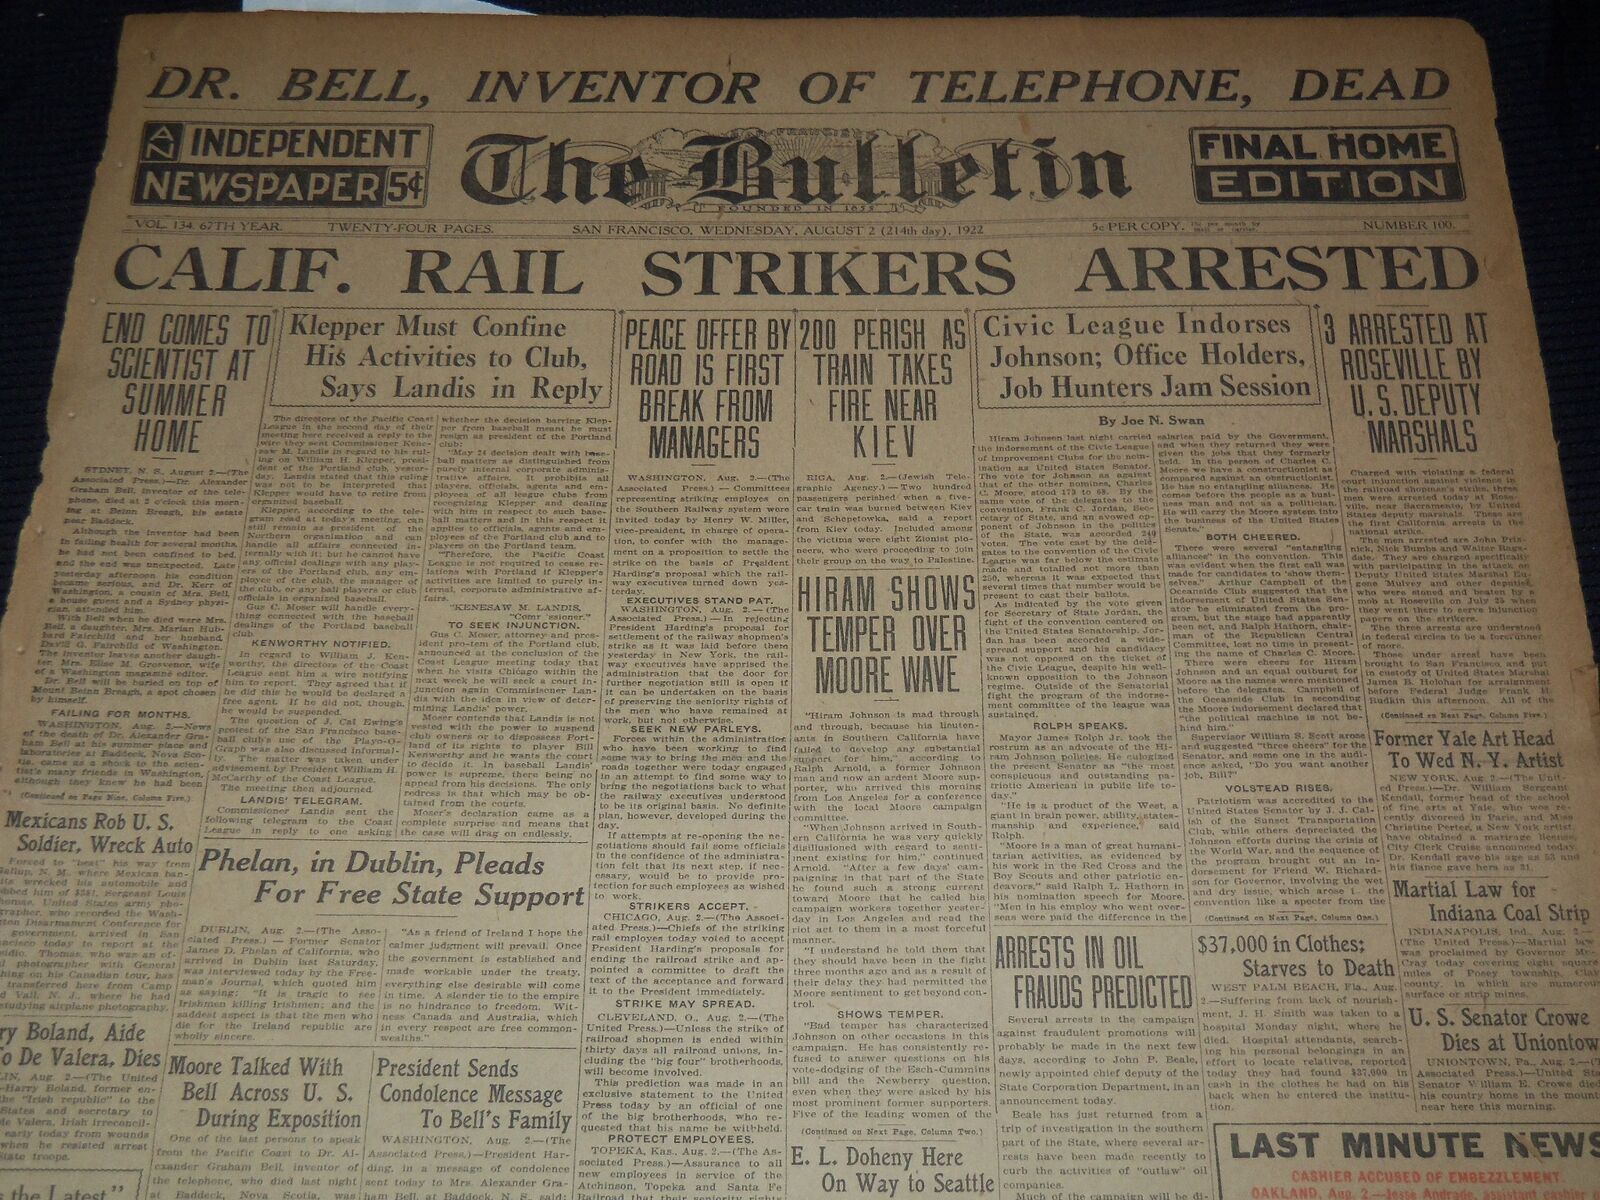 1922 AUGUST 2 SAN FRANCISCO BULLETIN - DR. BELL INVENTOR OF PHONE DEAD - NT 9567